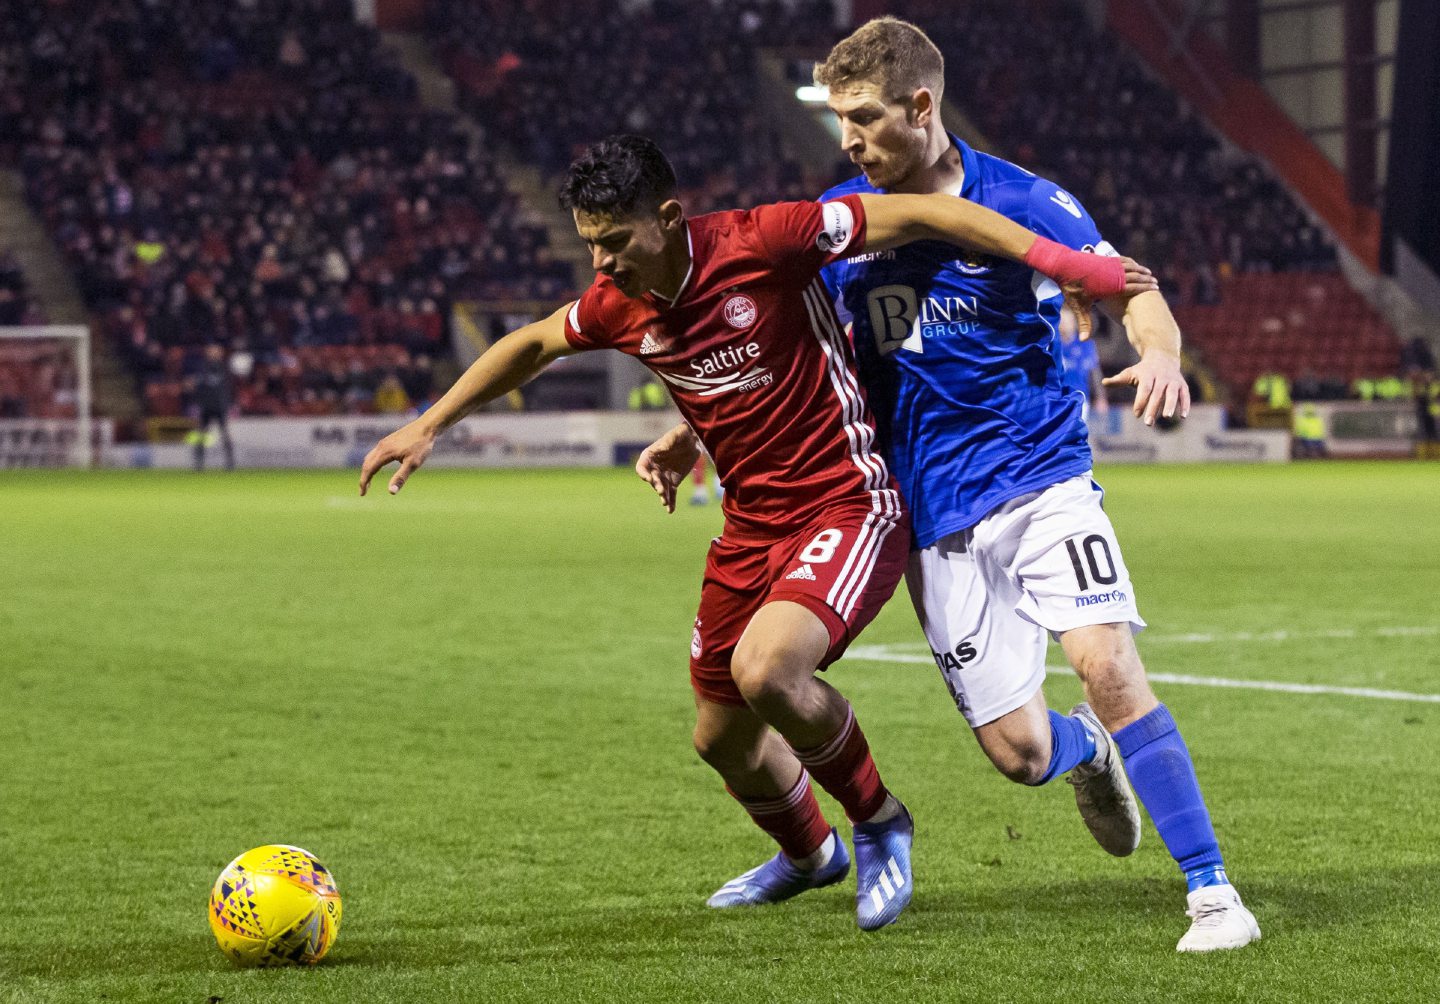 Aberdeen's Ronald Hernandez is challenged by St Johnstone's David Wotherspoon during the Ladbrokes Premiership match between Aberdeen and St Johnstone at Pittodrie Stadium on February 5.